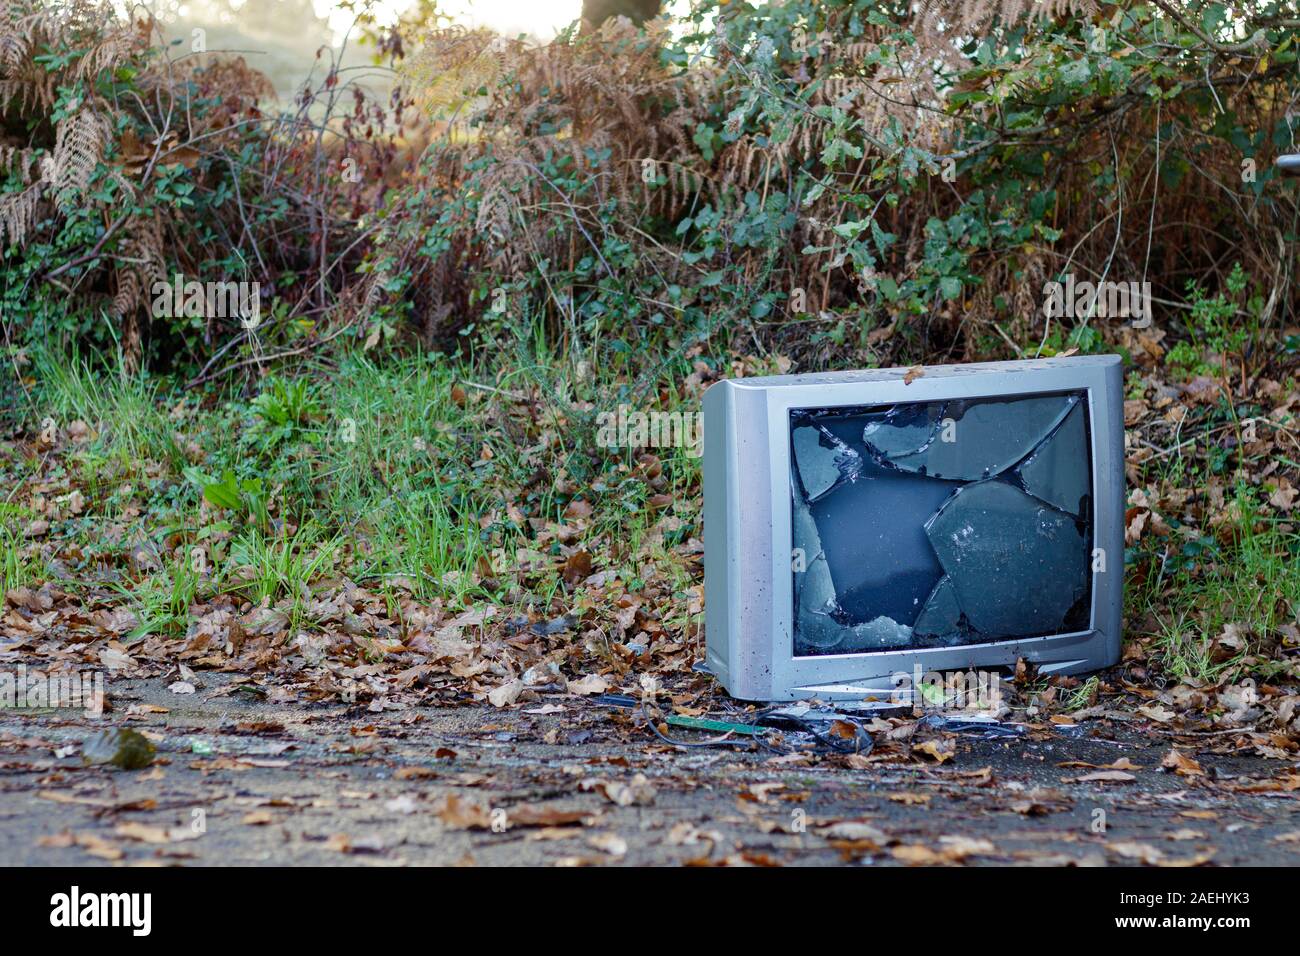 Coruna / Spain - December 08 2019: Old gray CRT television smashed and dumped at the side of the road in Coruna Spain Stock Photo